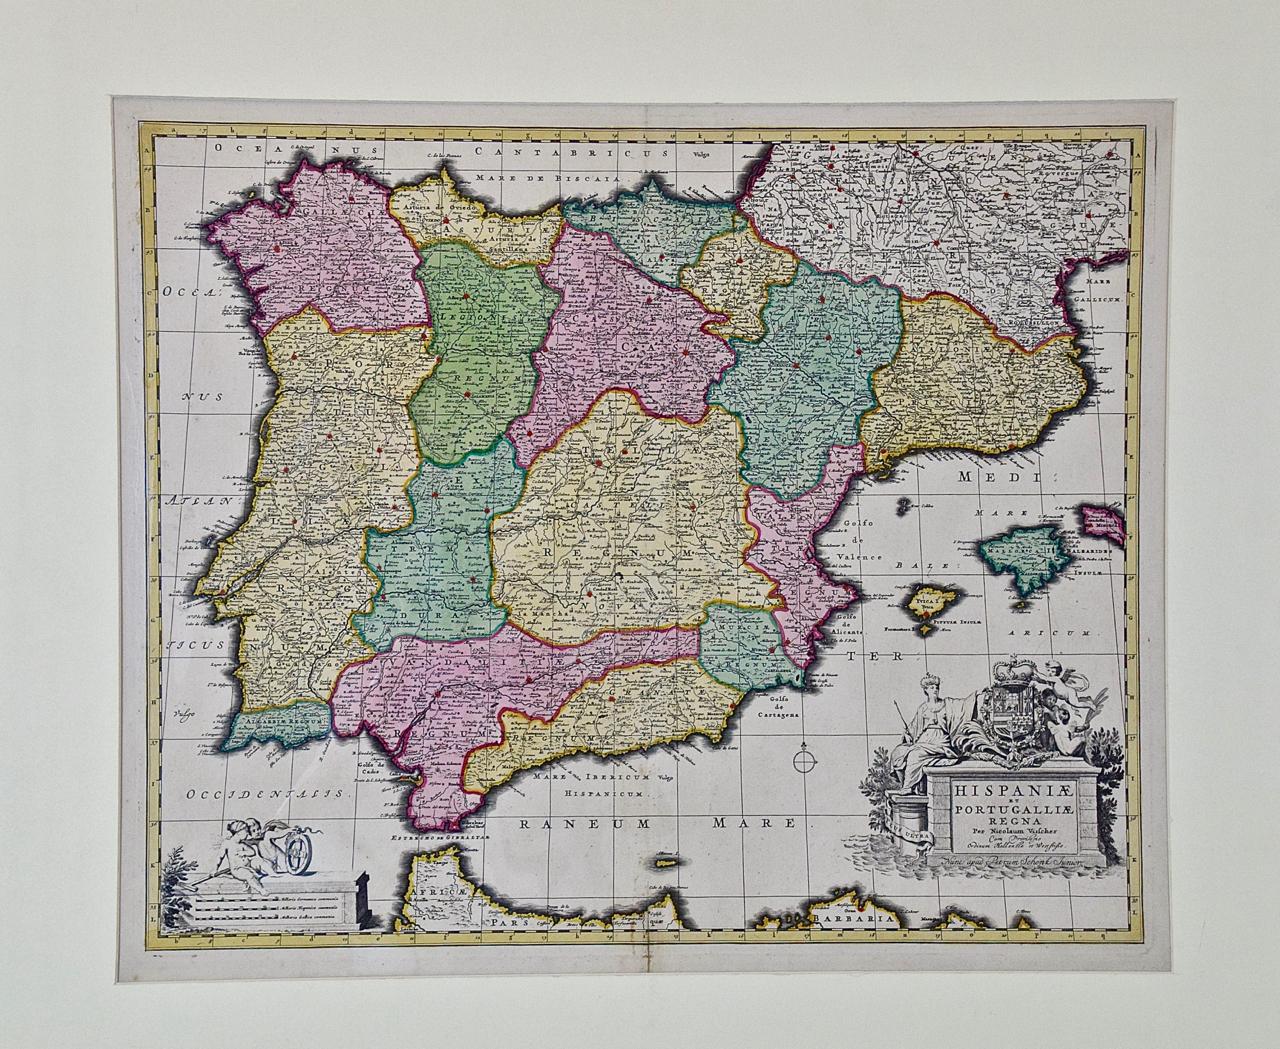 Spain and Portugal: A Hand-colored 17th/18th Century Map by Visscher  - Print by Nicolaus Visscher